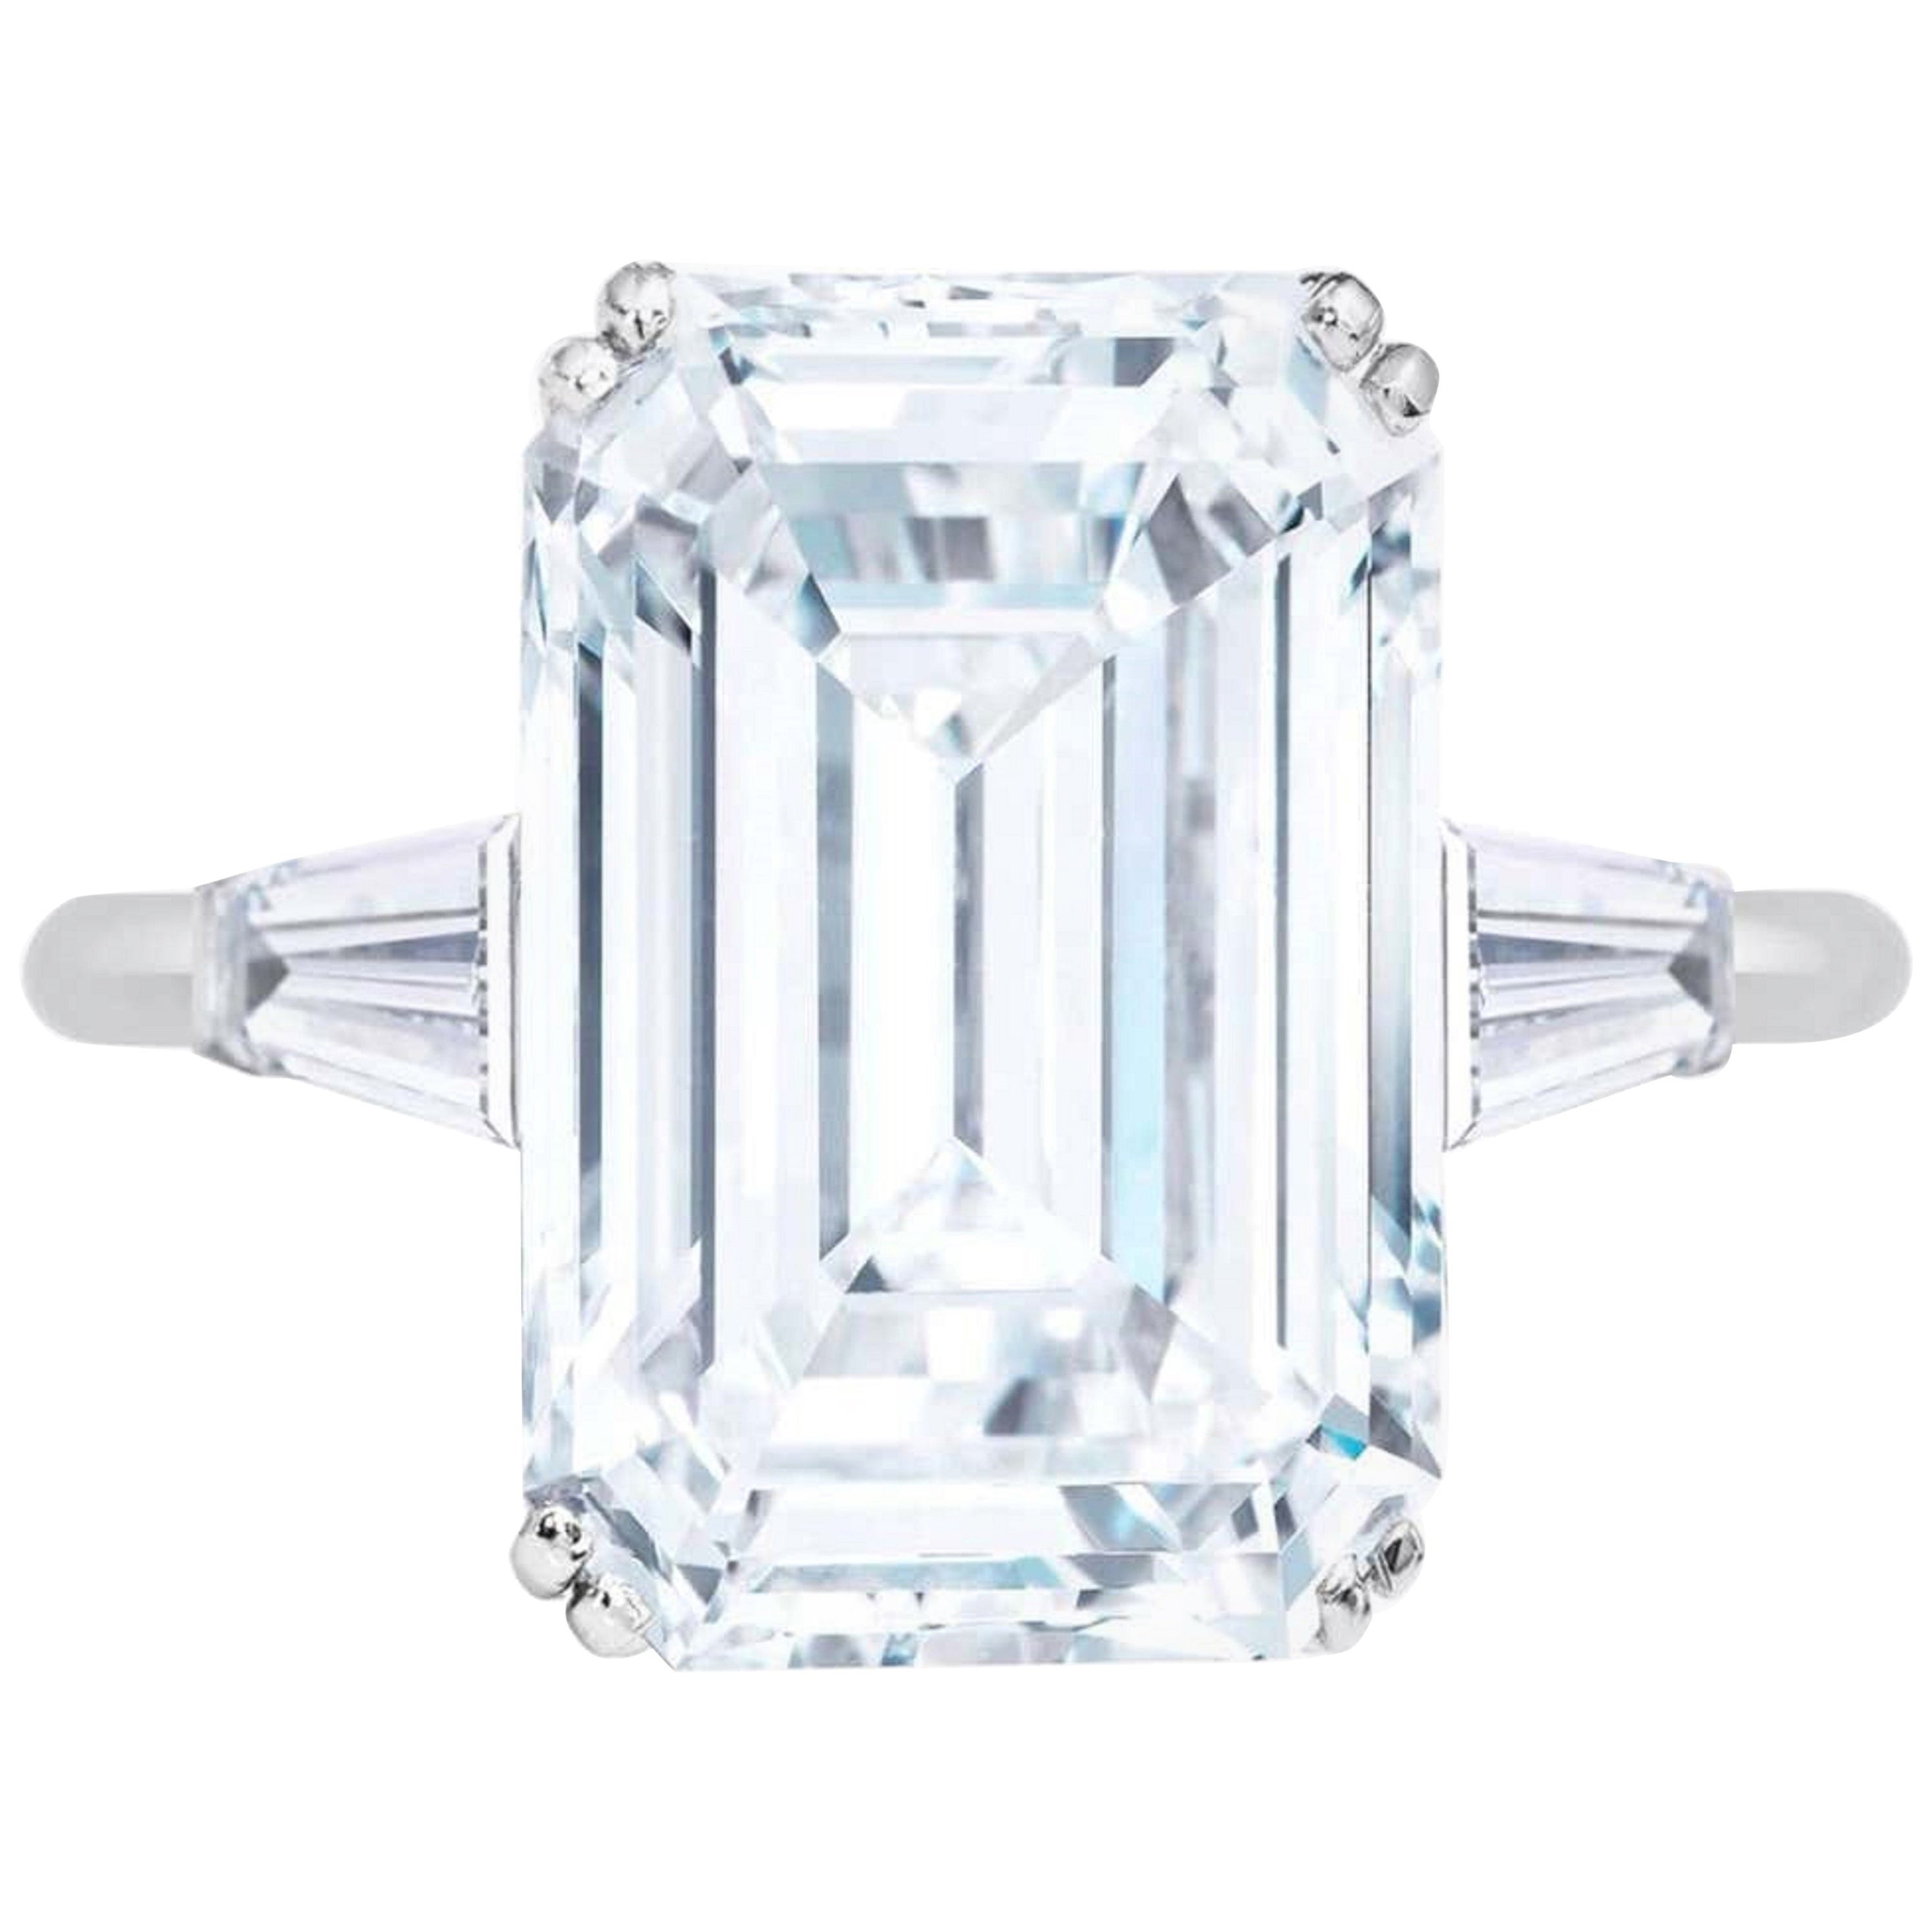 GIA Certified 4 Carat Emerald Cut Diamond Ring Flawless D Color For Sale